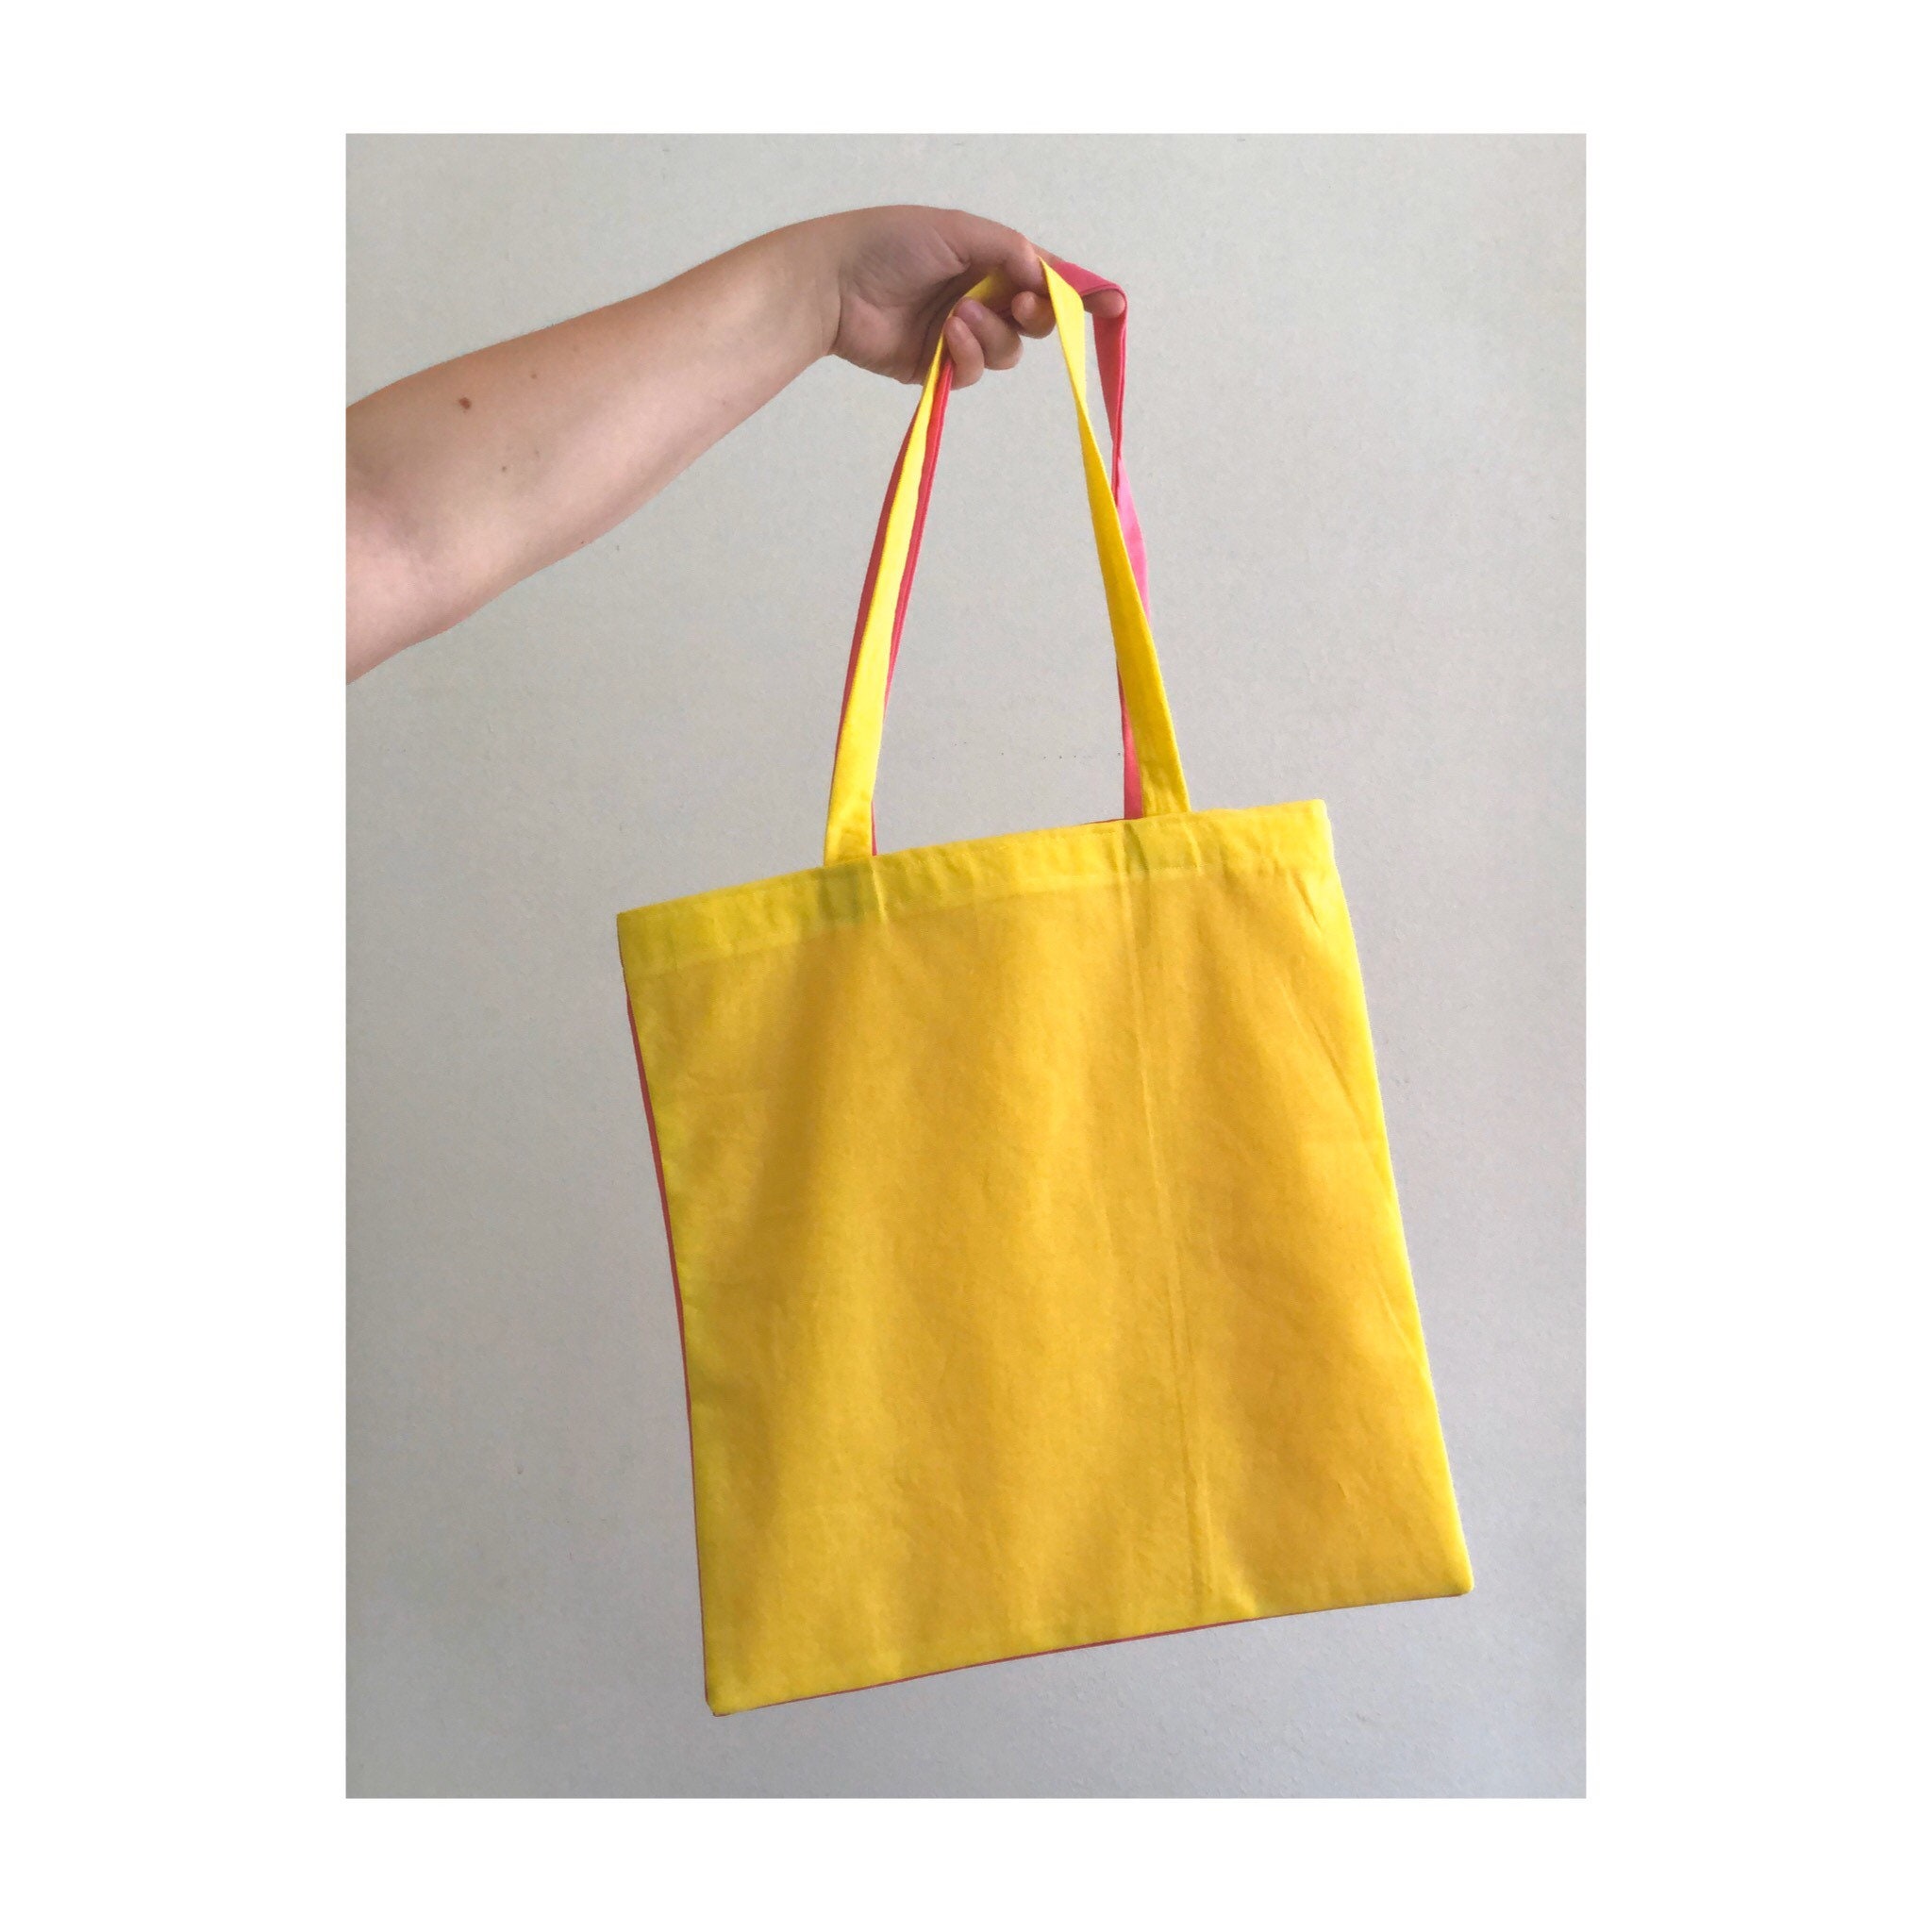 25 Ways to Decorate a Plain Tote Bag, HelloNatural.co